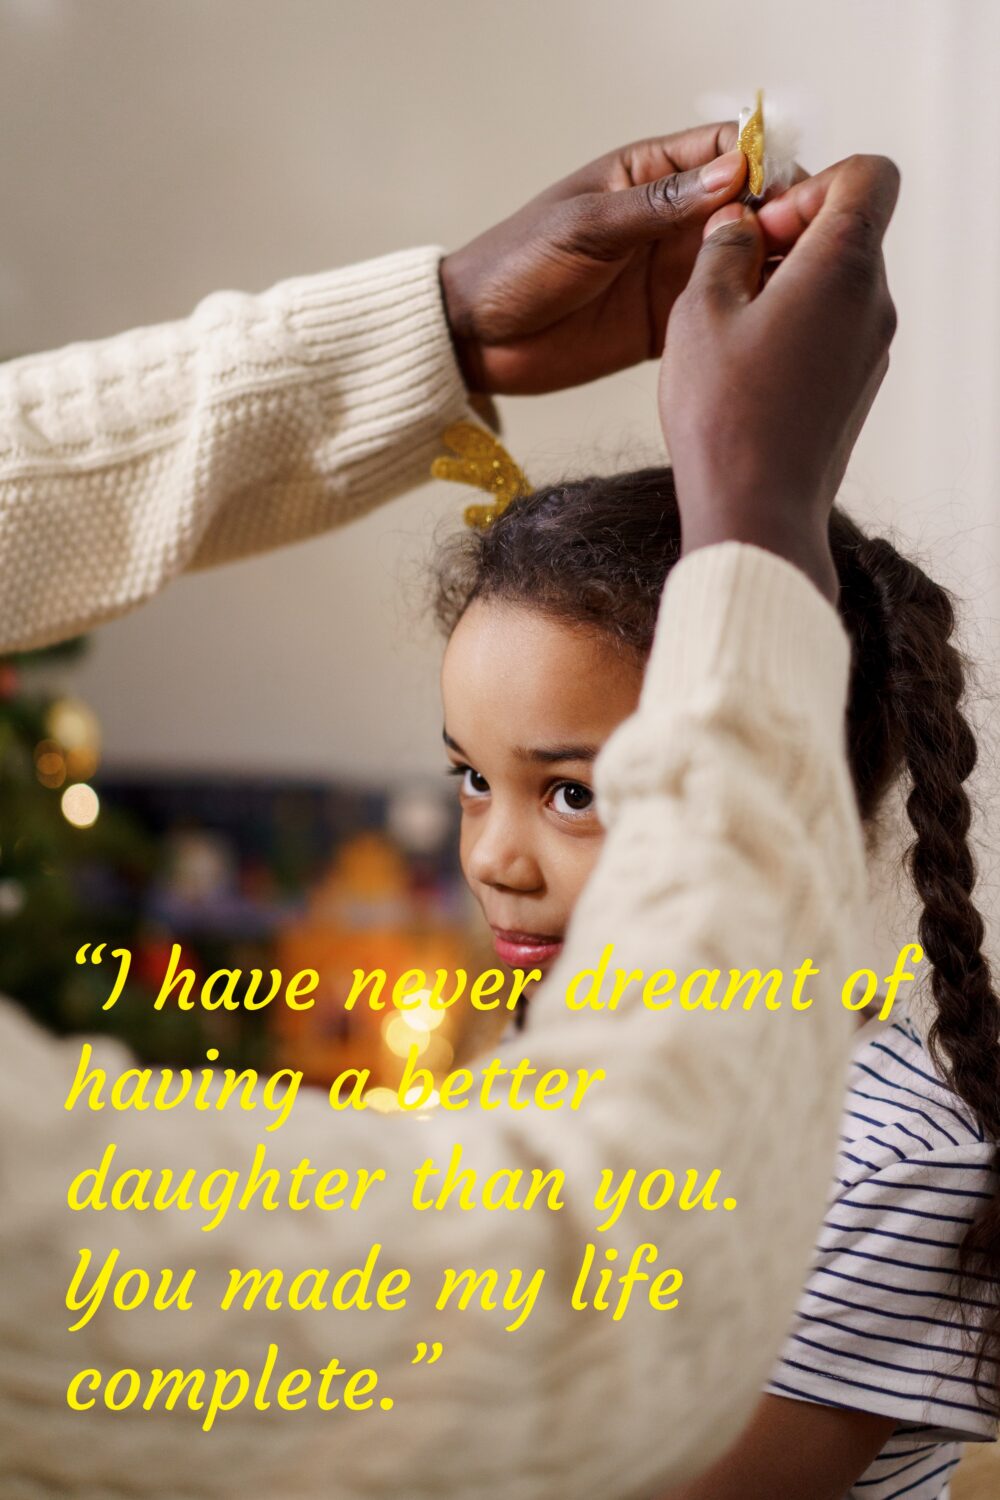 Father Adoring his daughter, Daughters quotes.